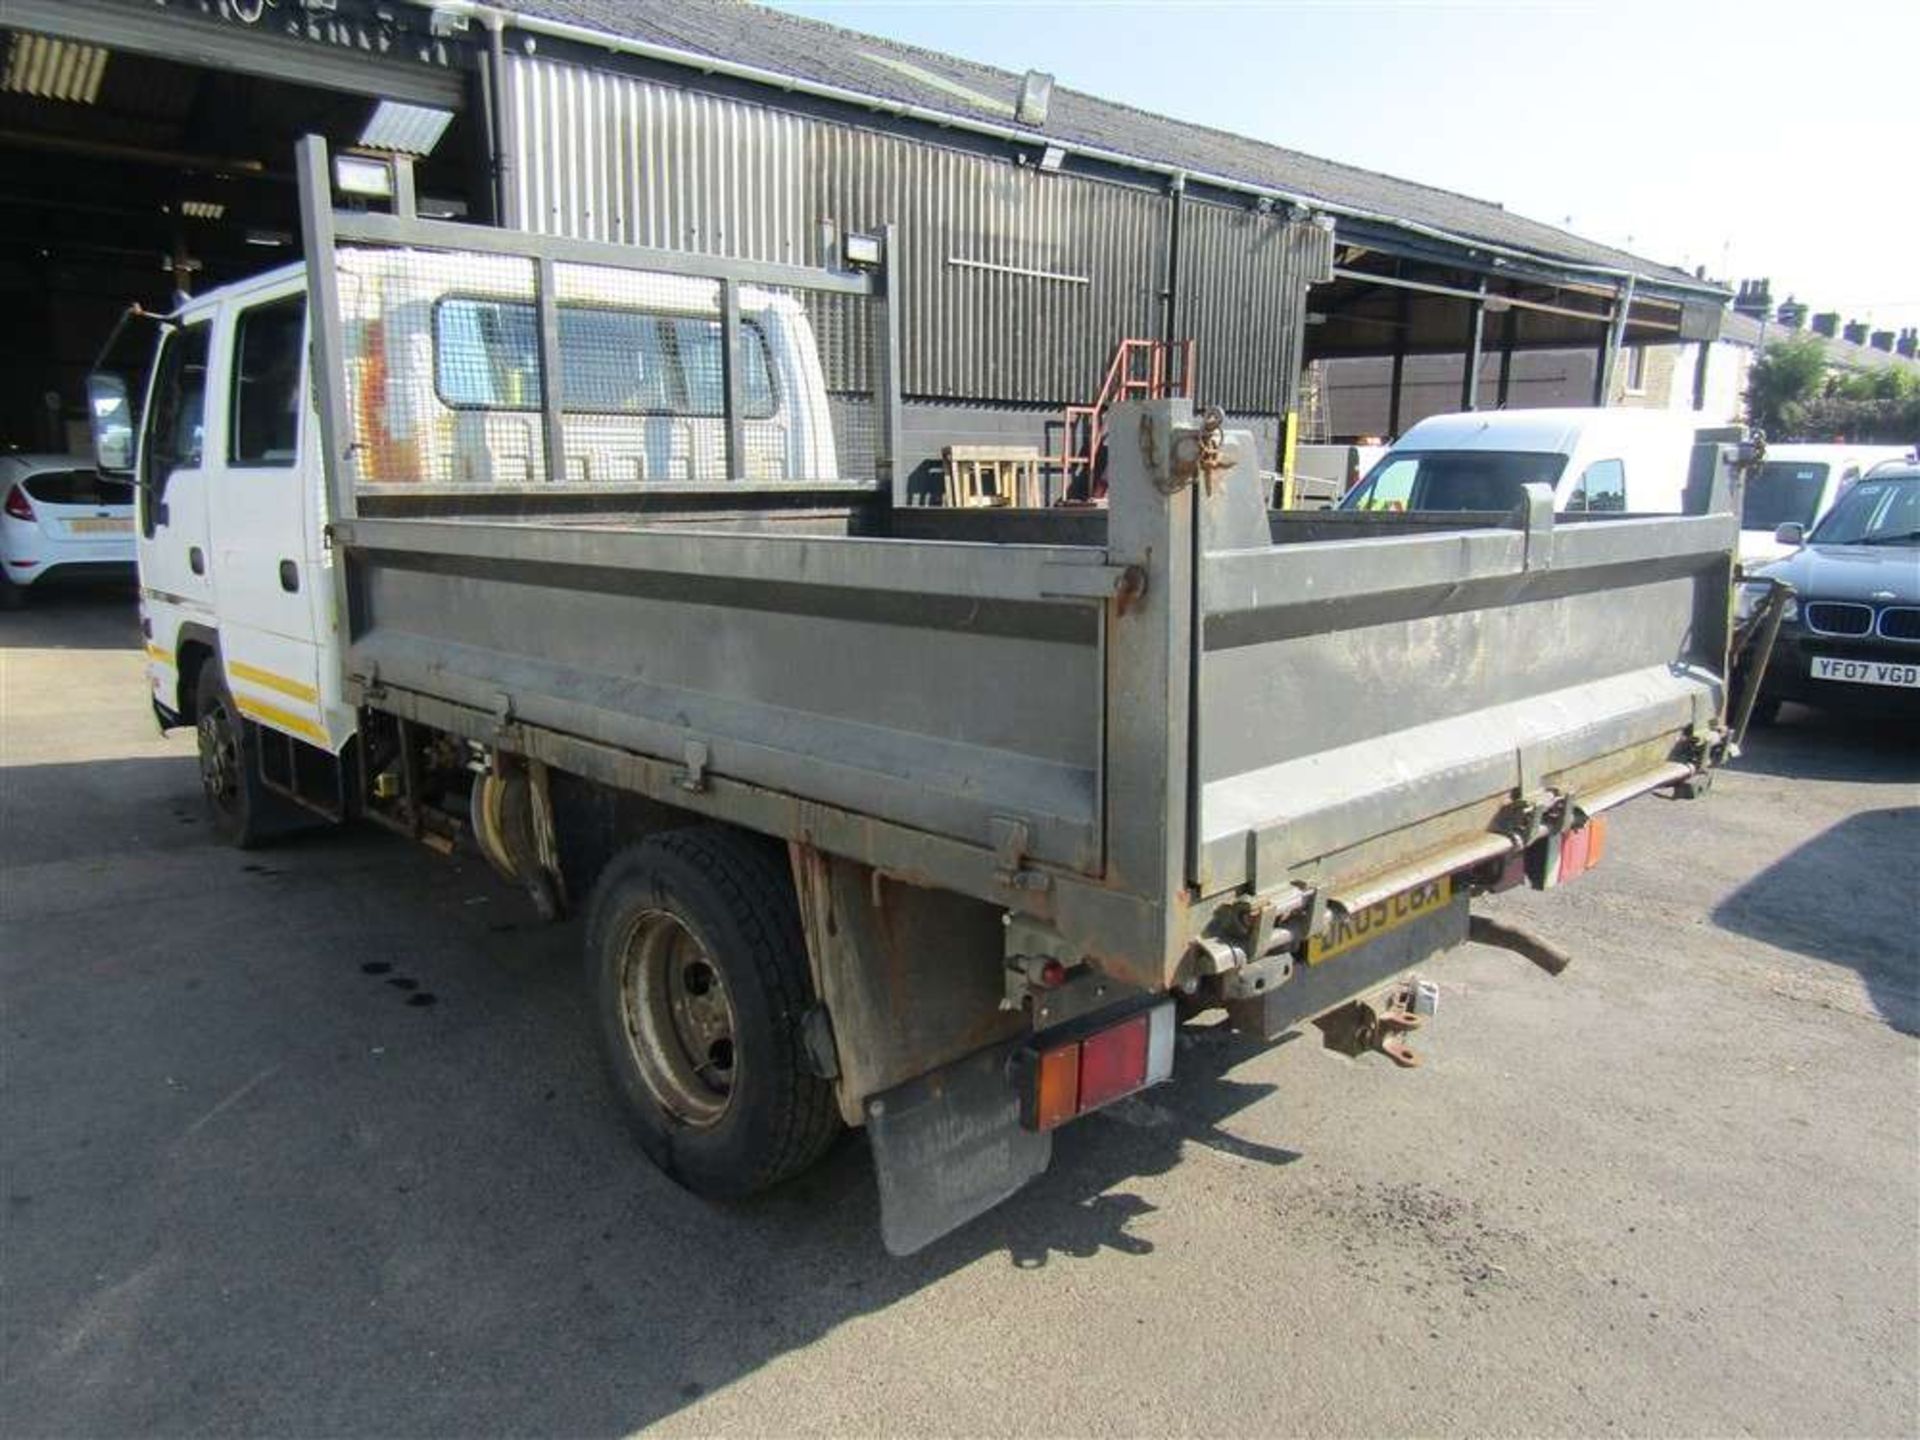 2009 09 reg Isuzu NPR-6 Tipper with Built in Compressor (Direct Electricity NW) - Image 3 of 7